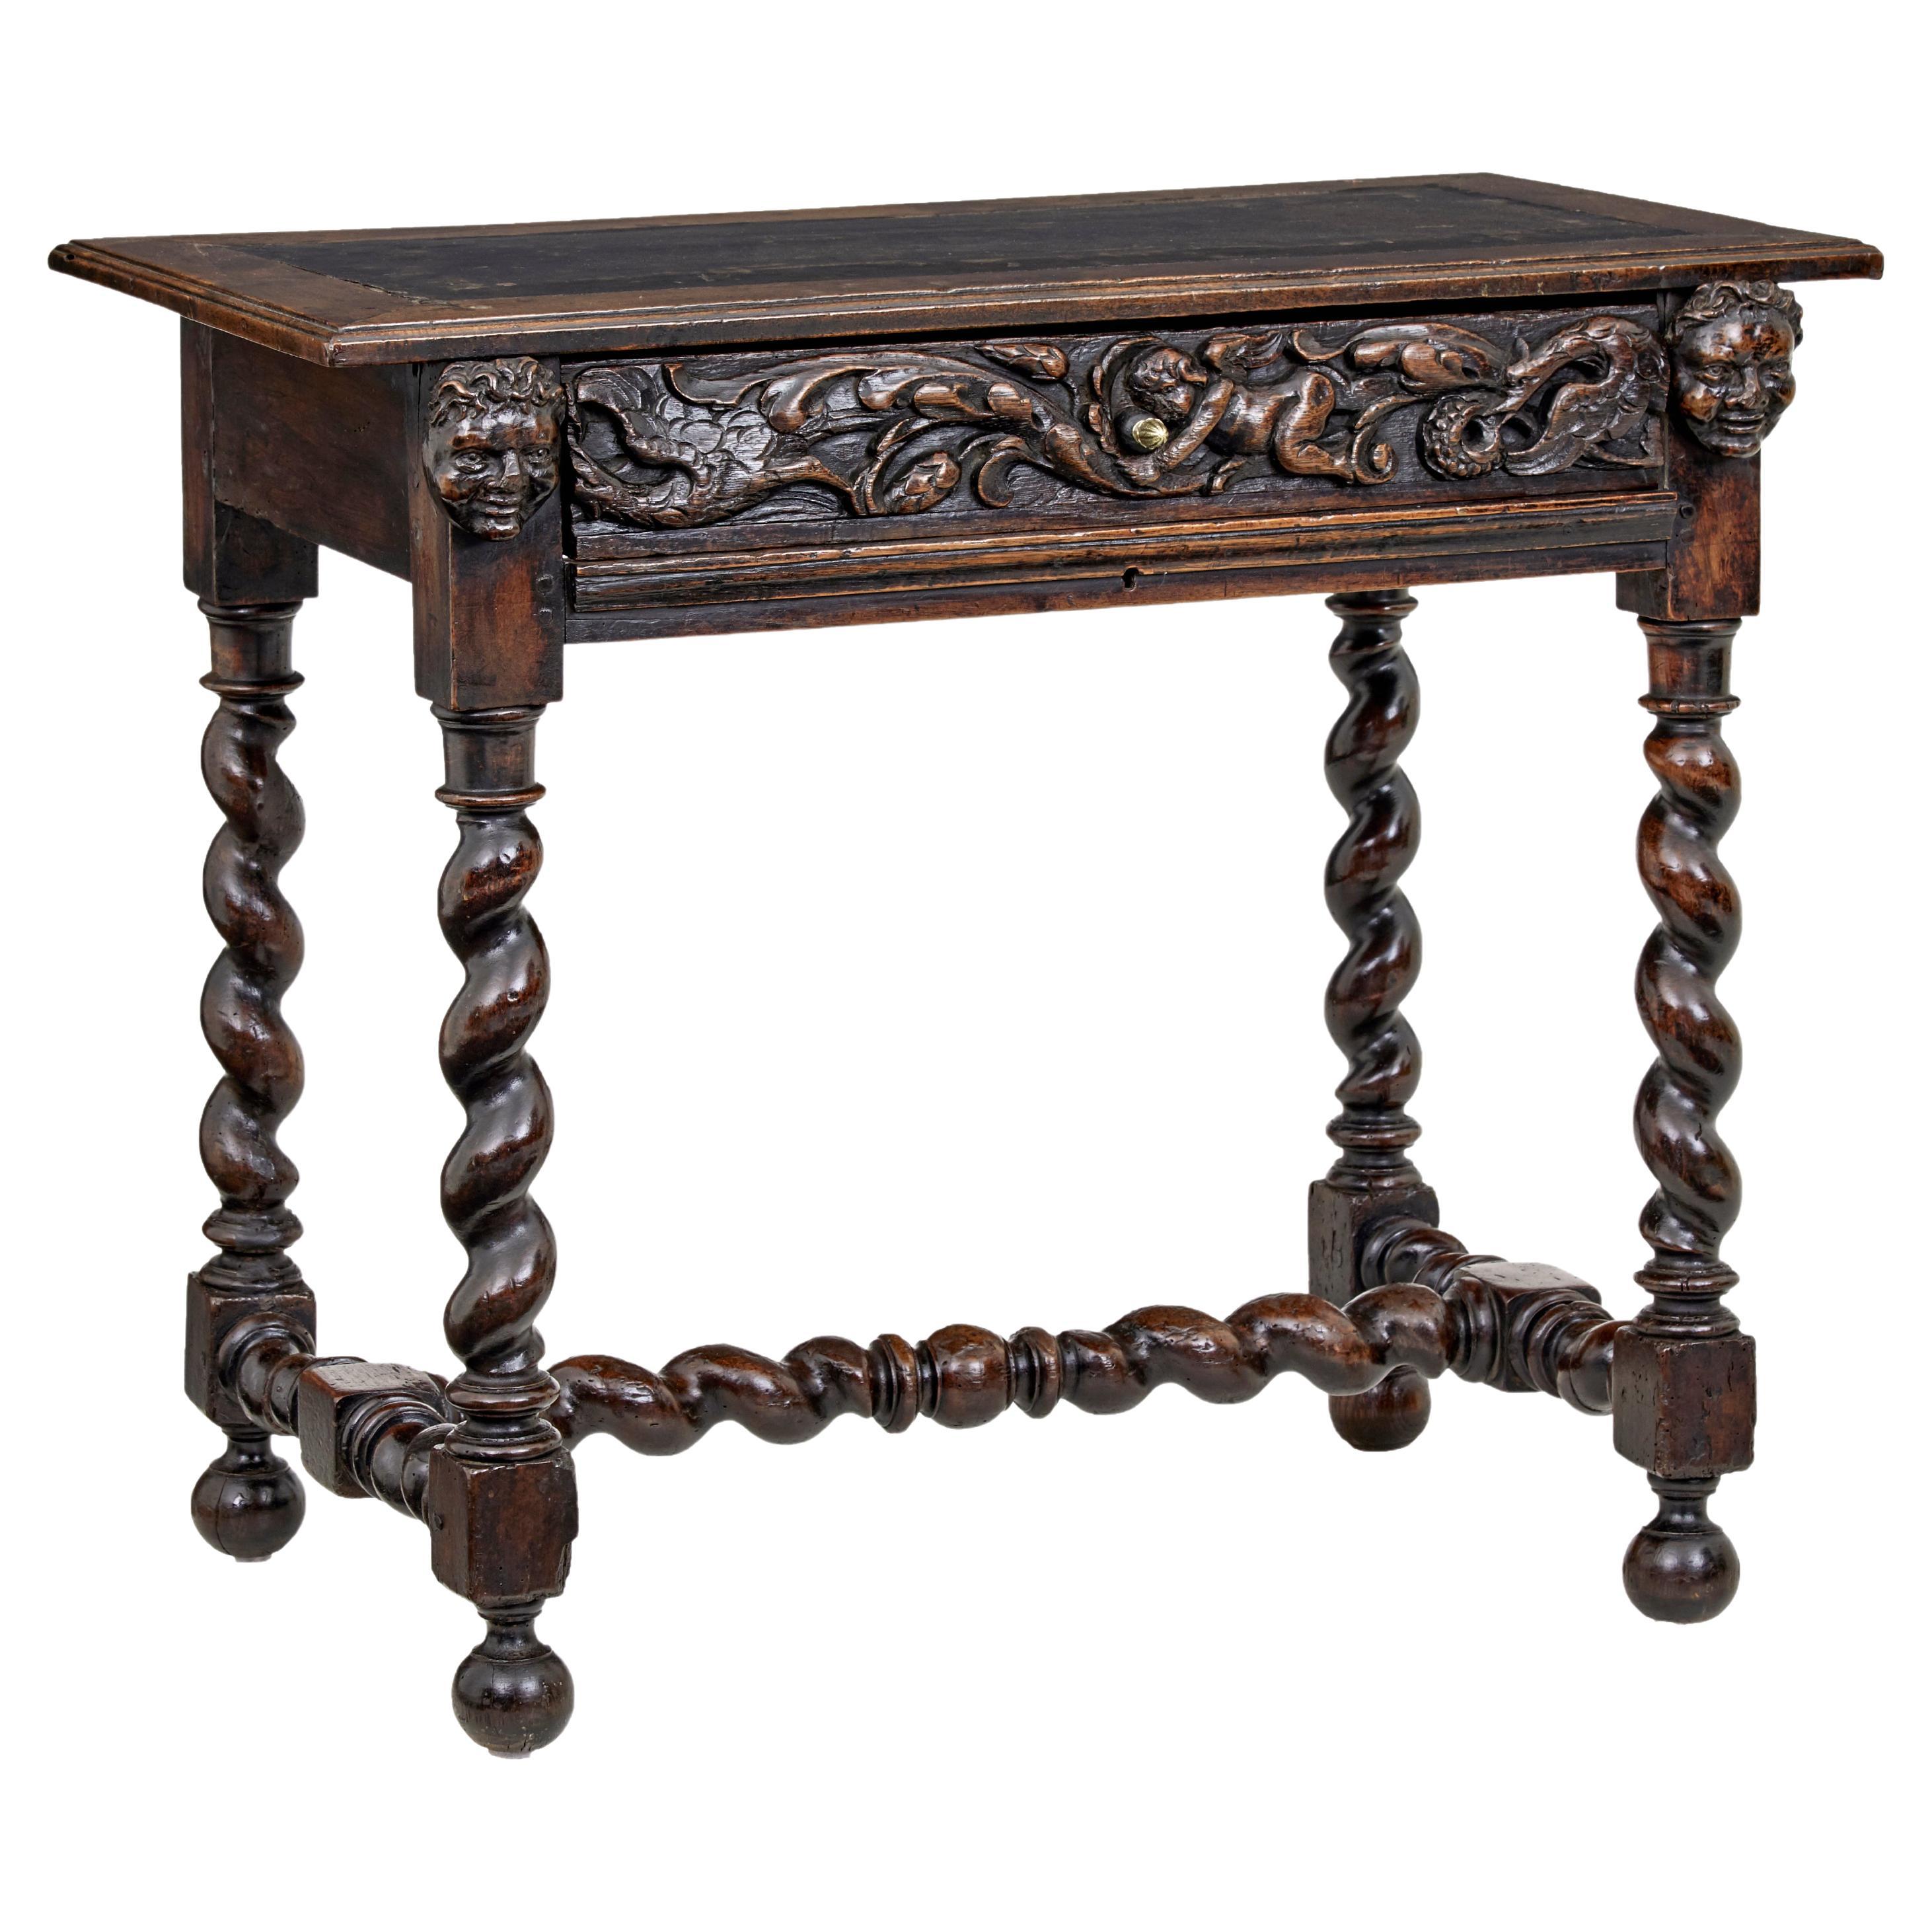 Early 19th century Flemish carved walnut side table For Sale